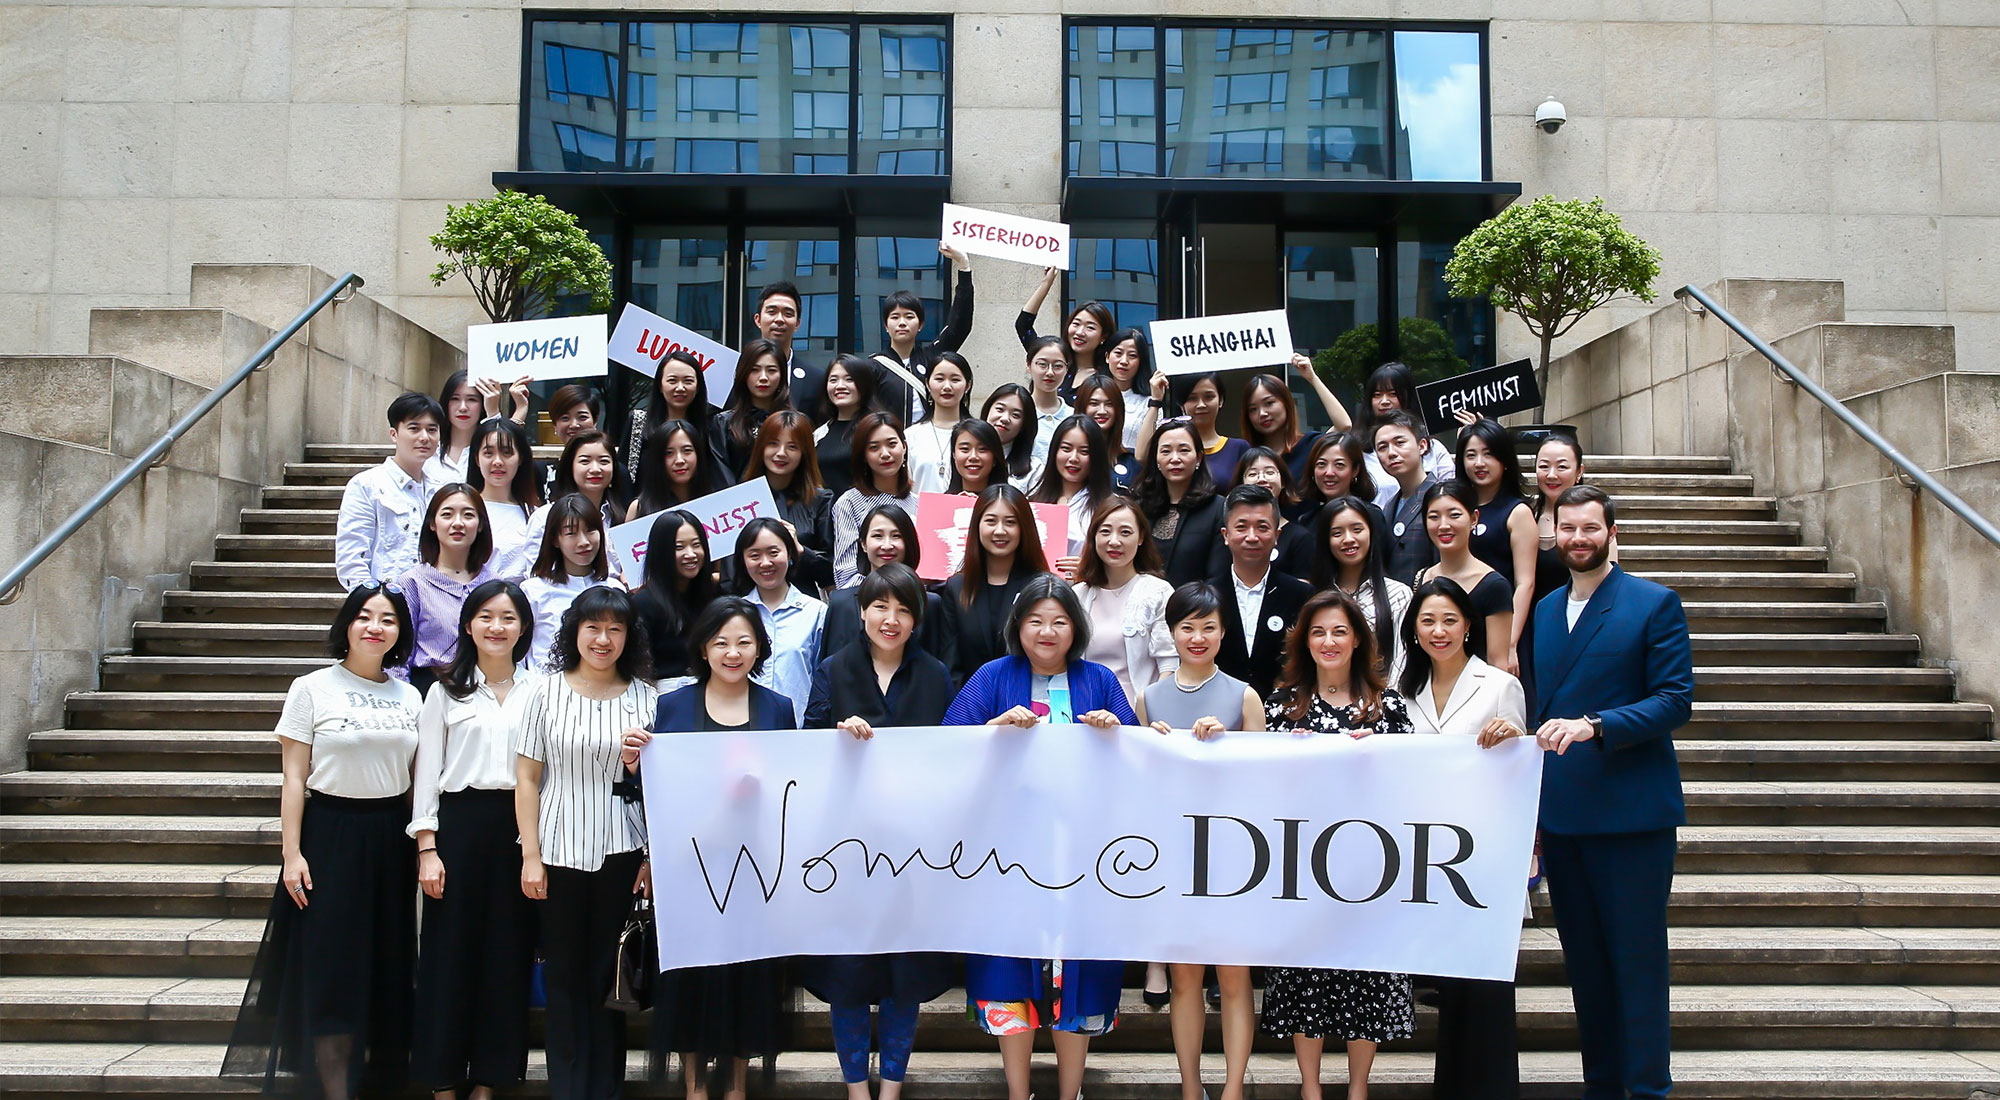 Women@Dior mentoring program introduces first online learning